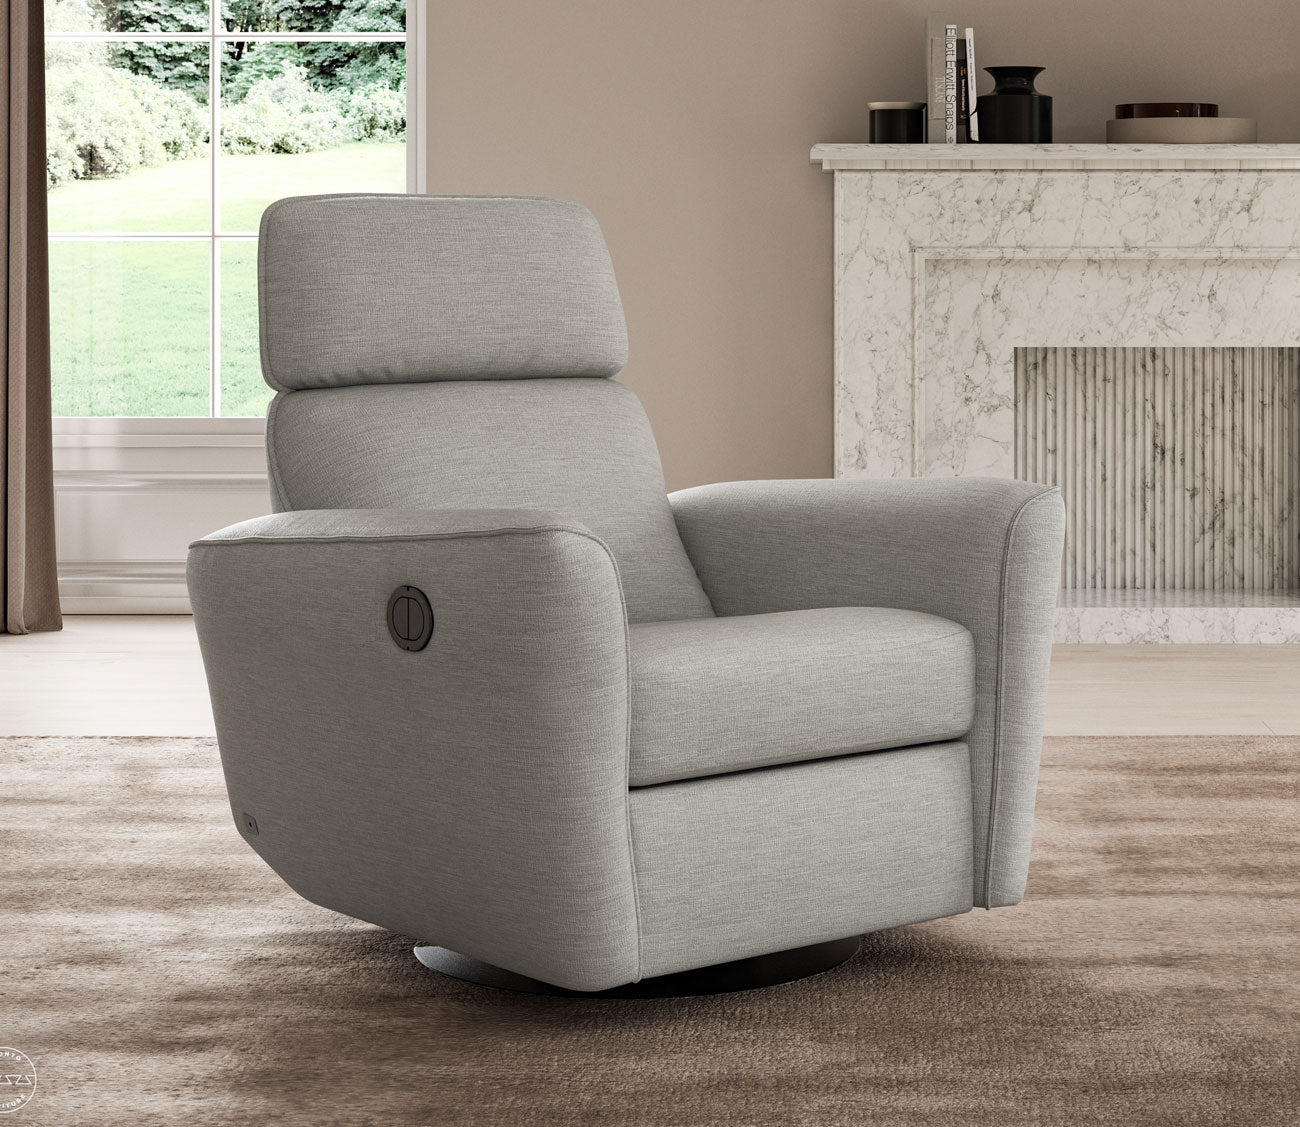 https://cdn.shopify.com/s/files/1/2420/9425/products/welted-lounger-recliner-chair-by-luonto-775633.jpg?v=1656779735